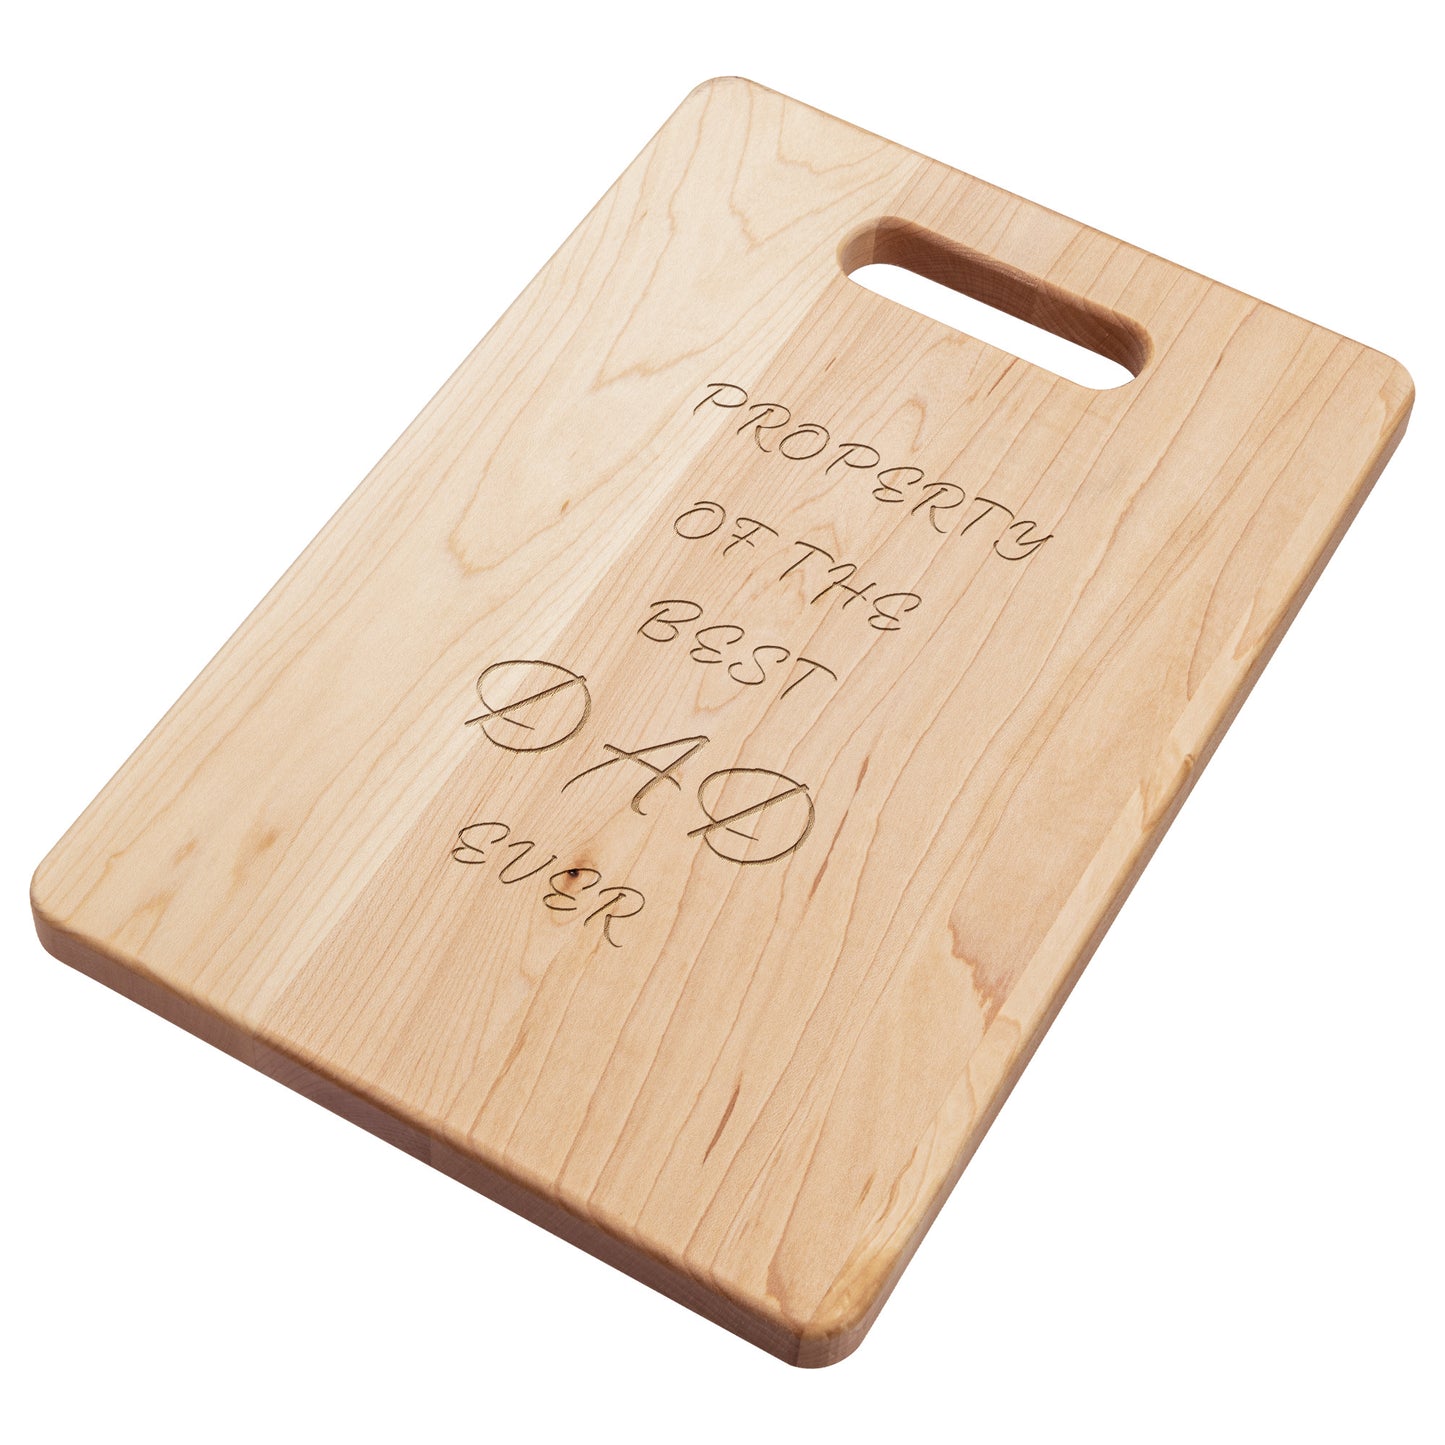 Celebrate Fathers Day With A Cutting Board For The "Best Dad Ever"